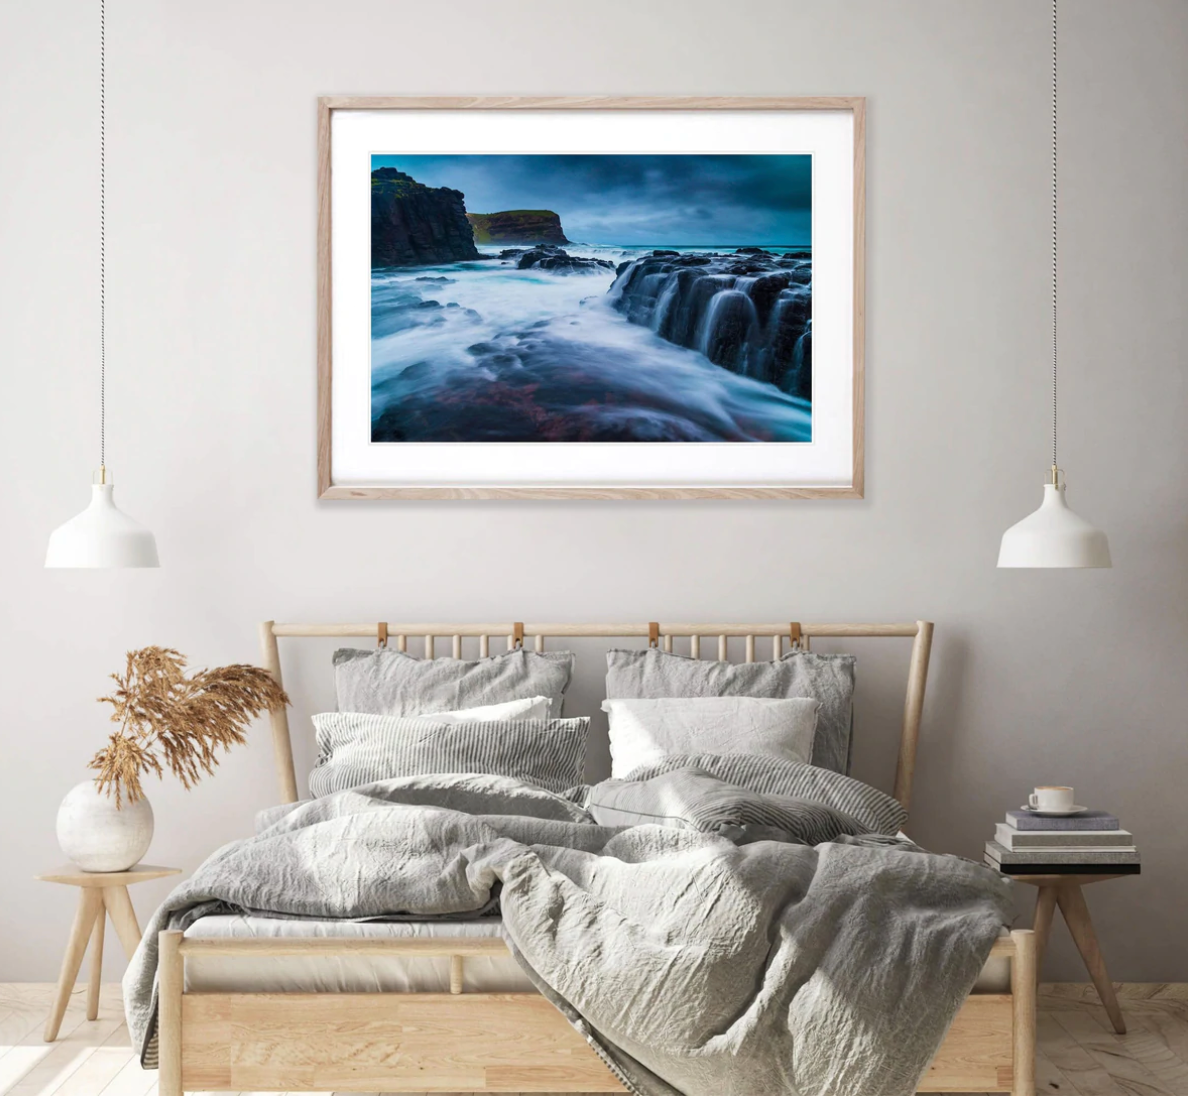 Off the Wall with Abstract Art Prints